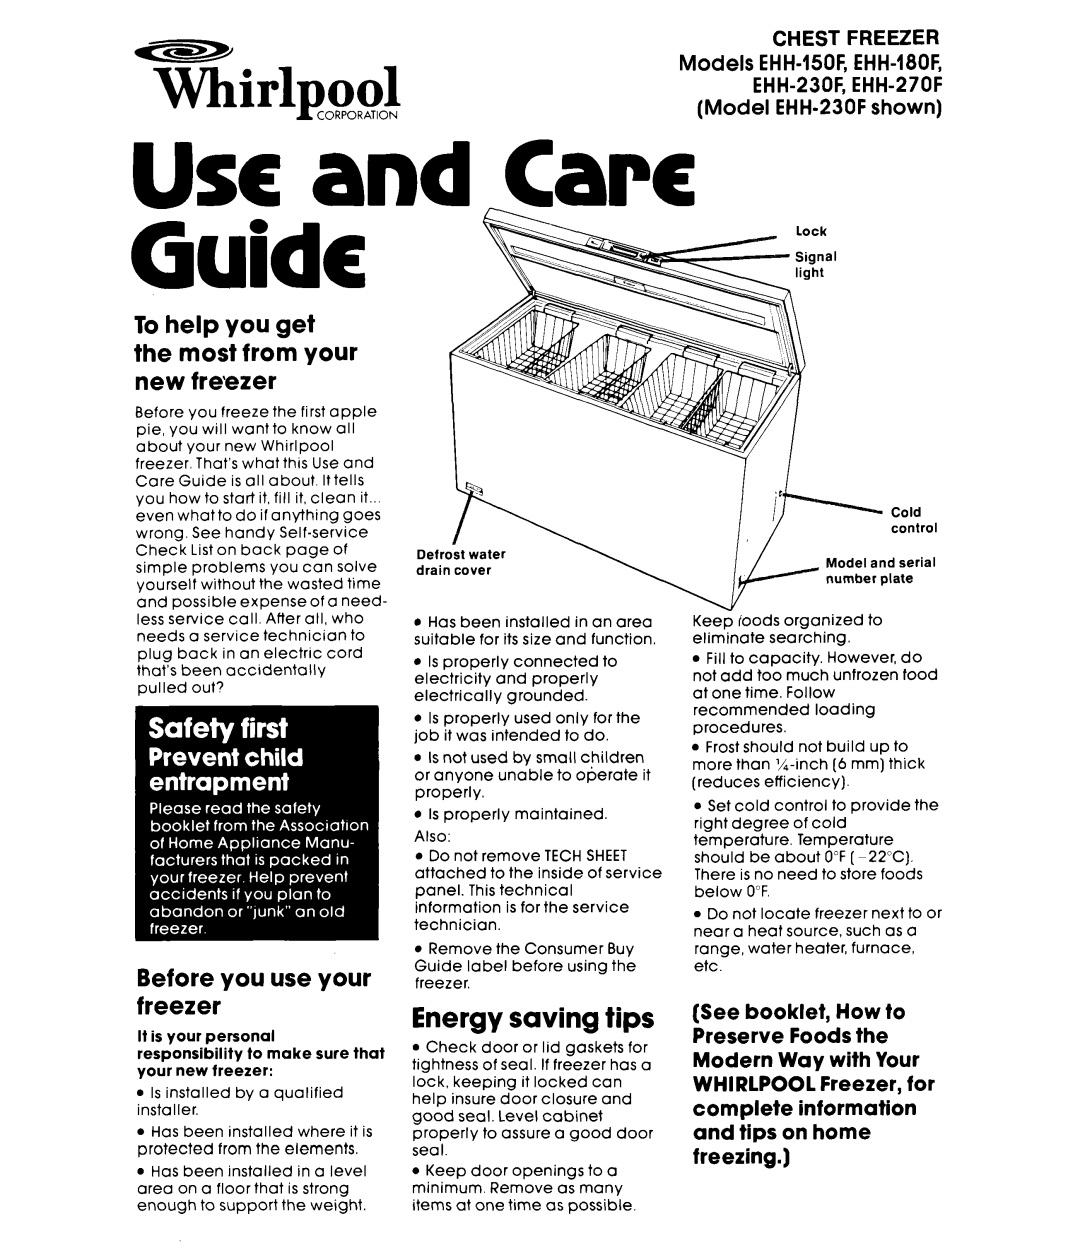 Whirlpool manual Energy saving tips, Chest Freezer, Models, EHH-230Fshown, USCand -Care Guide, EHH-150F, EHH-1806 